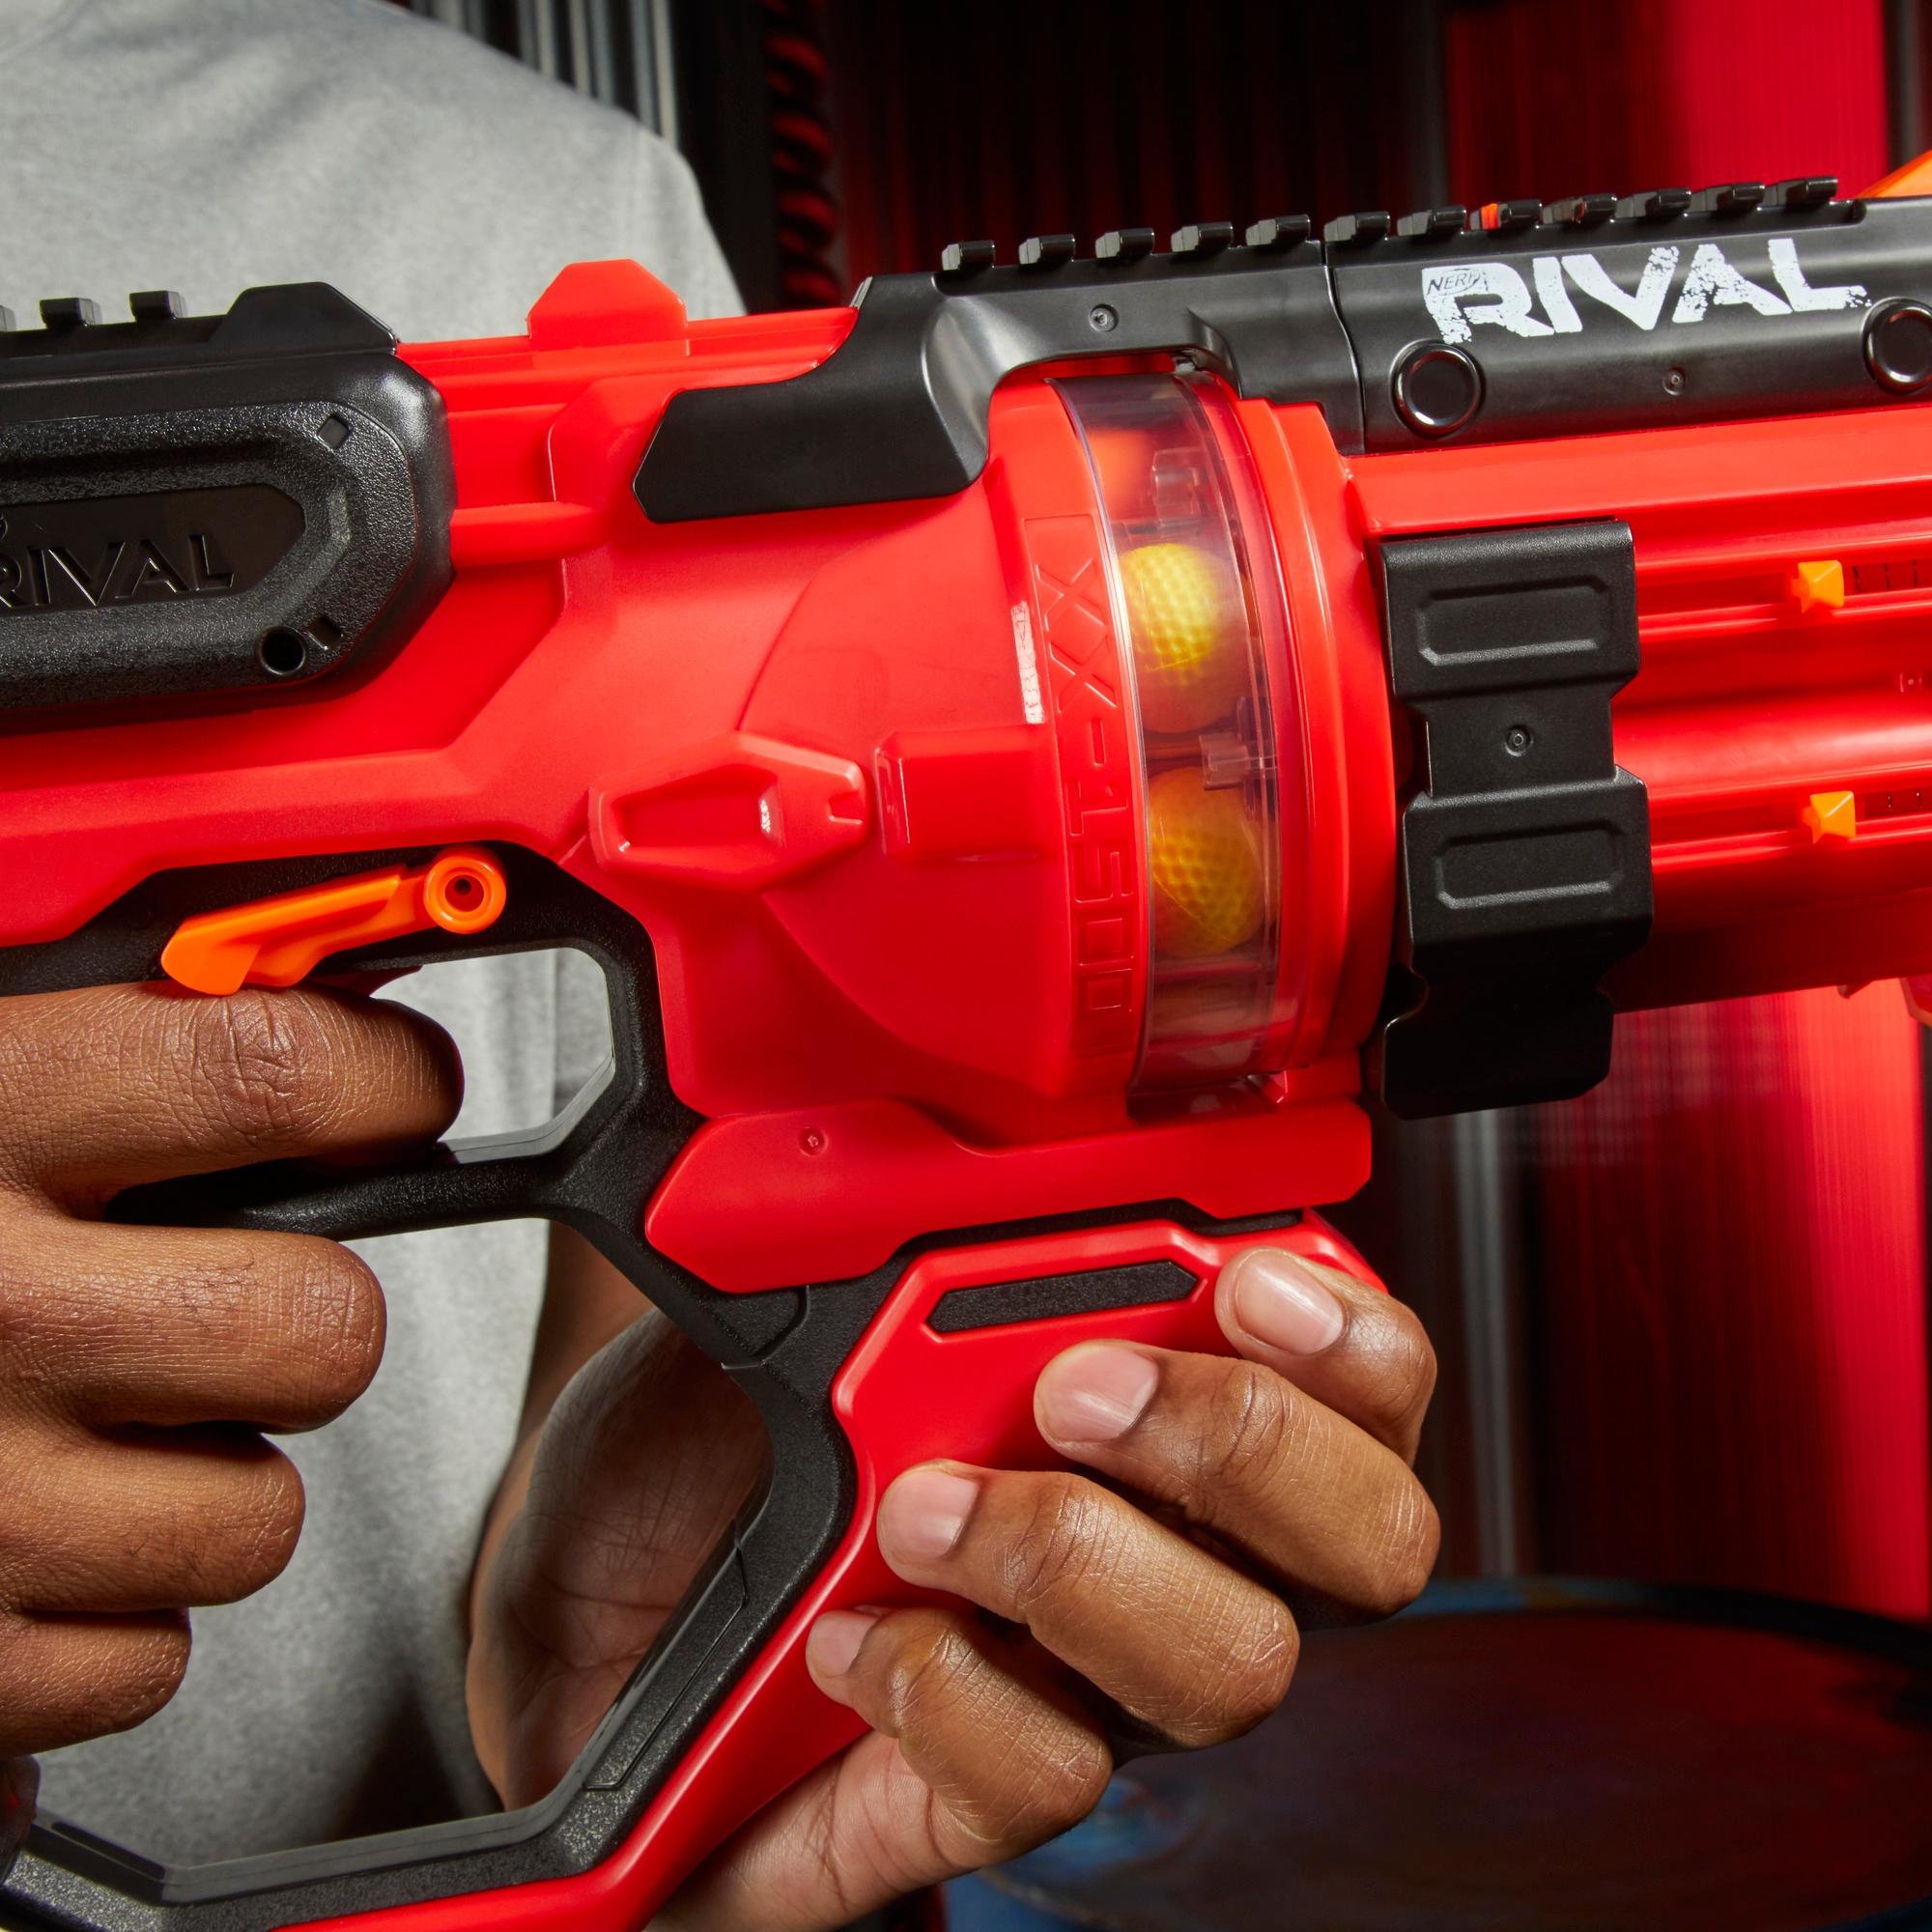 Nerf Rival Roundhouse XX-1500 Red Blaster -- Clear Rotating Chamber -- 5 Integrated Magazines, 15 Nerf Rival Rounds